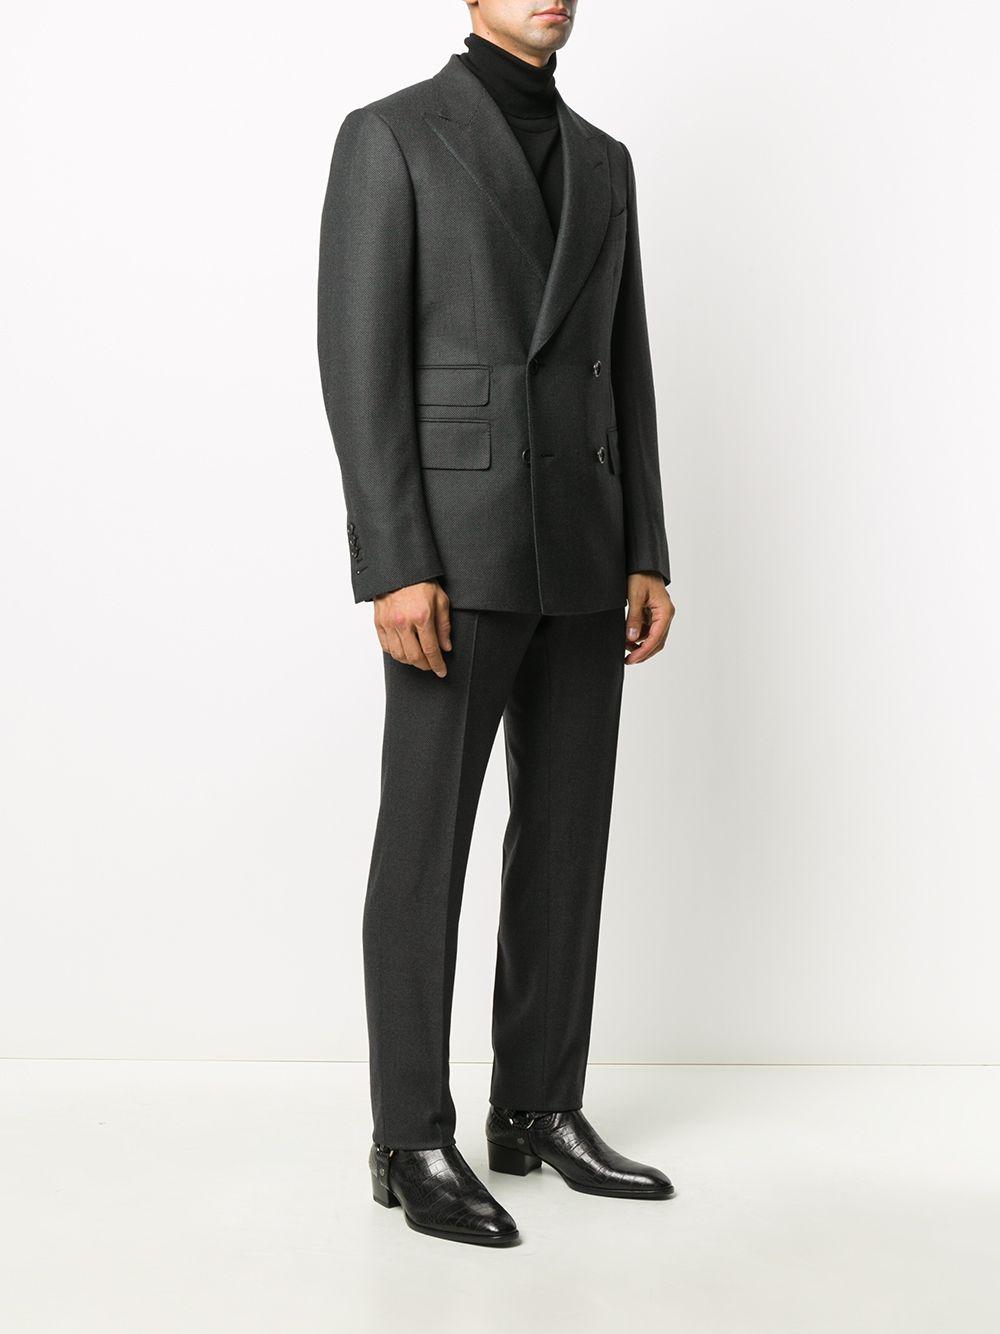 Tom Ford Wool Two-piece Double-breasted Suit in Grey (Gray) for Men - Lyst